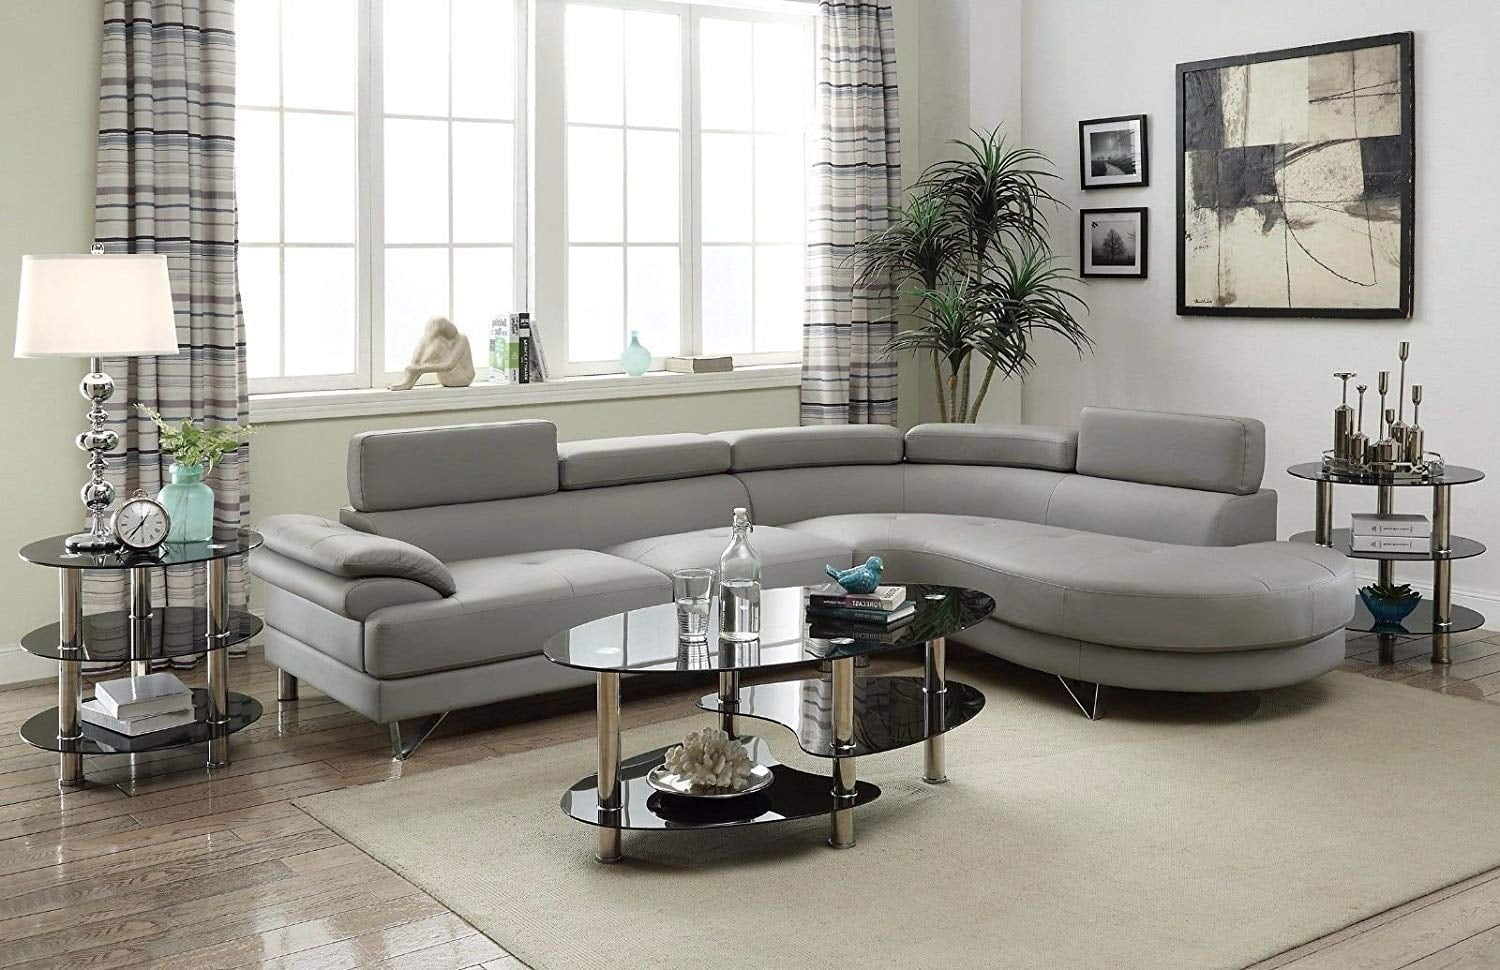 buy leather sofa set colors gray